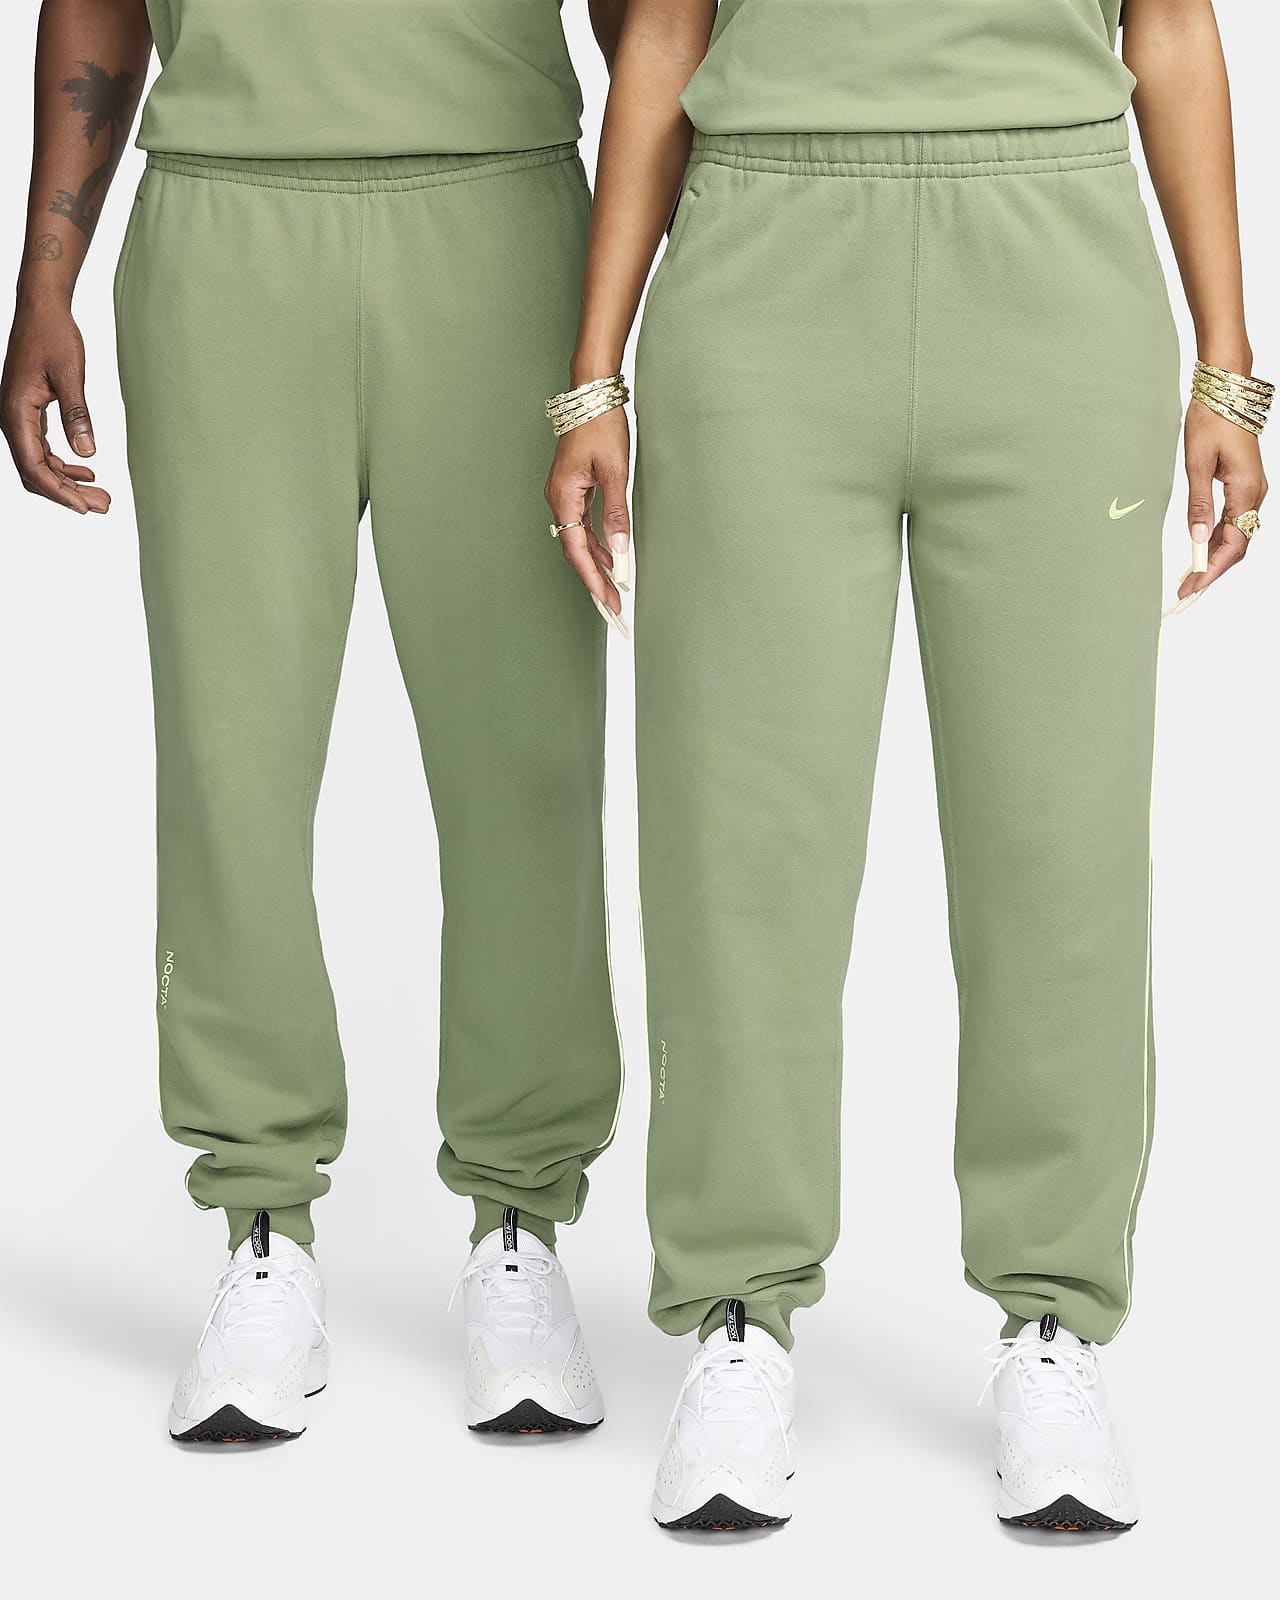 Nike x Nocta Warm - Up Pant – buy now at LangcomShops Online Store